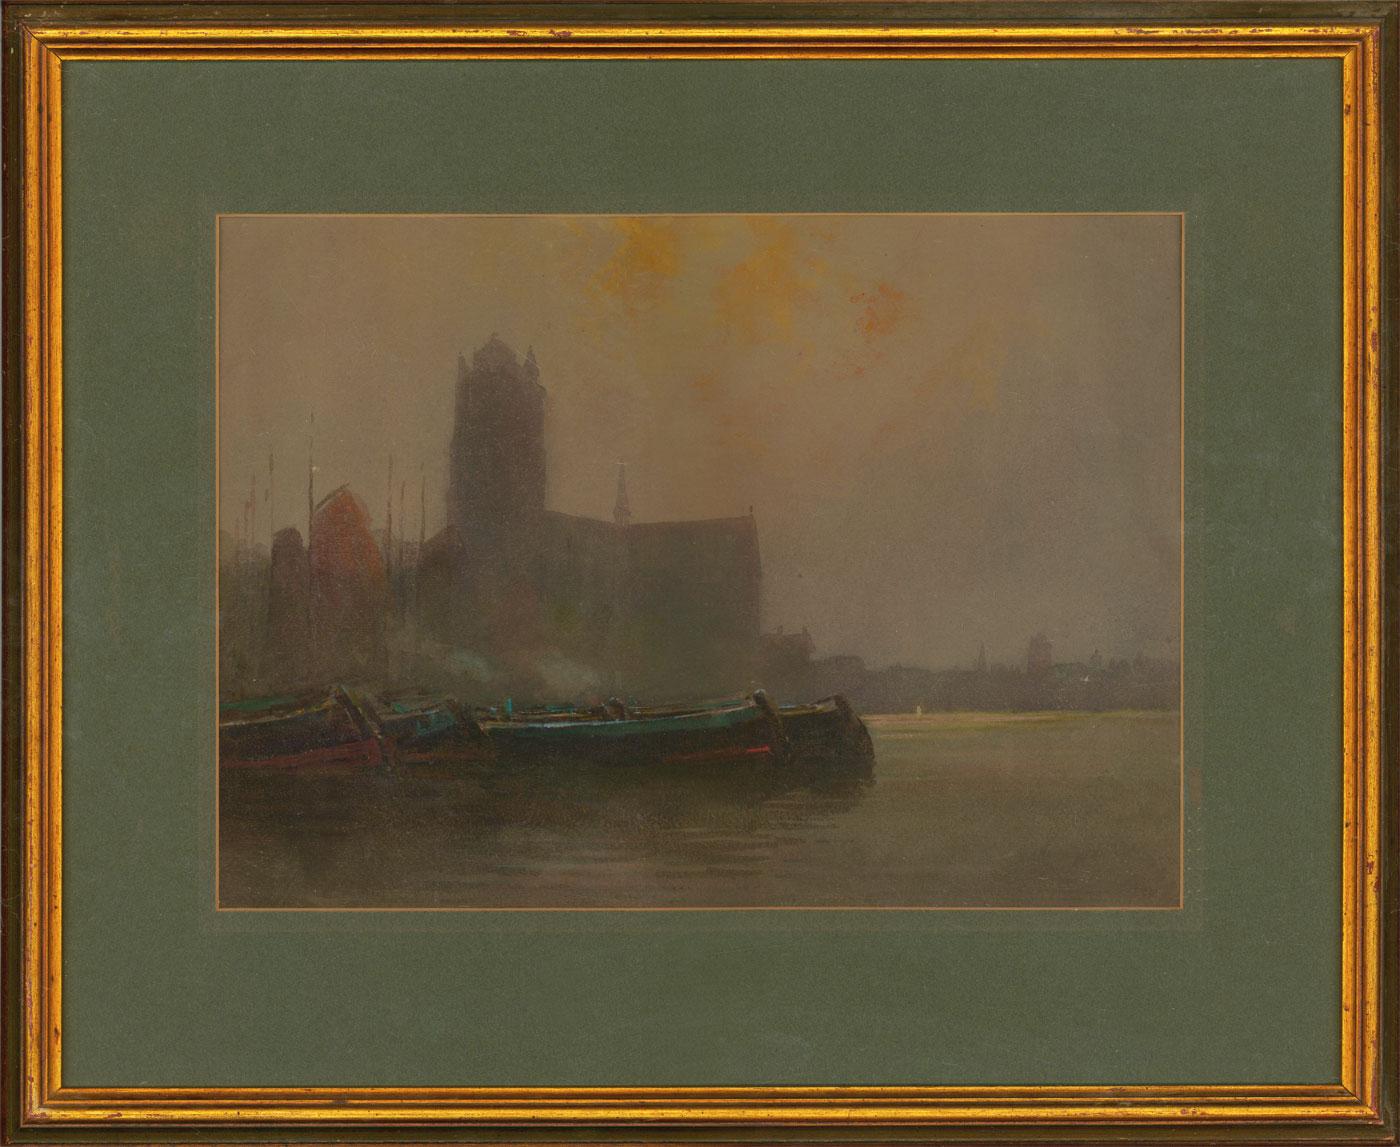 A charming watercolour by the artist Charles Edward Hannaford, depicting a continental church with barges in the foreground. The use of watercolour as a medium perfectly compliments Hannafords expressive yet detailed style, exquisitely portraying